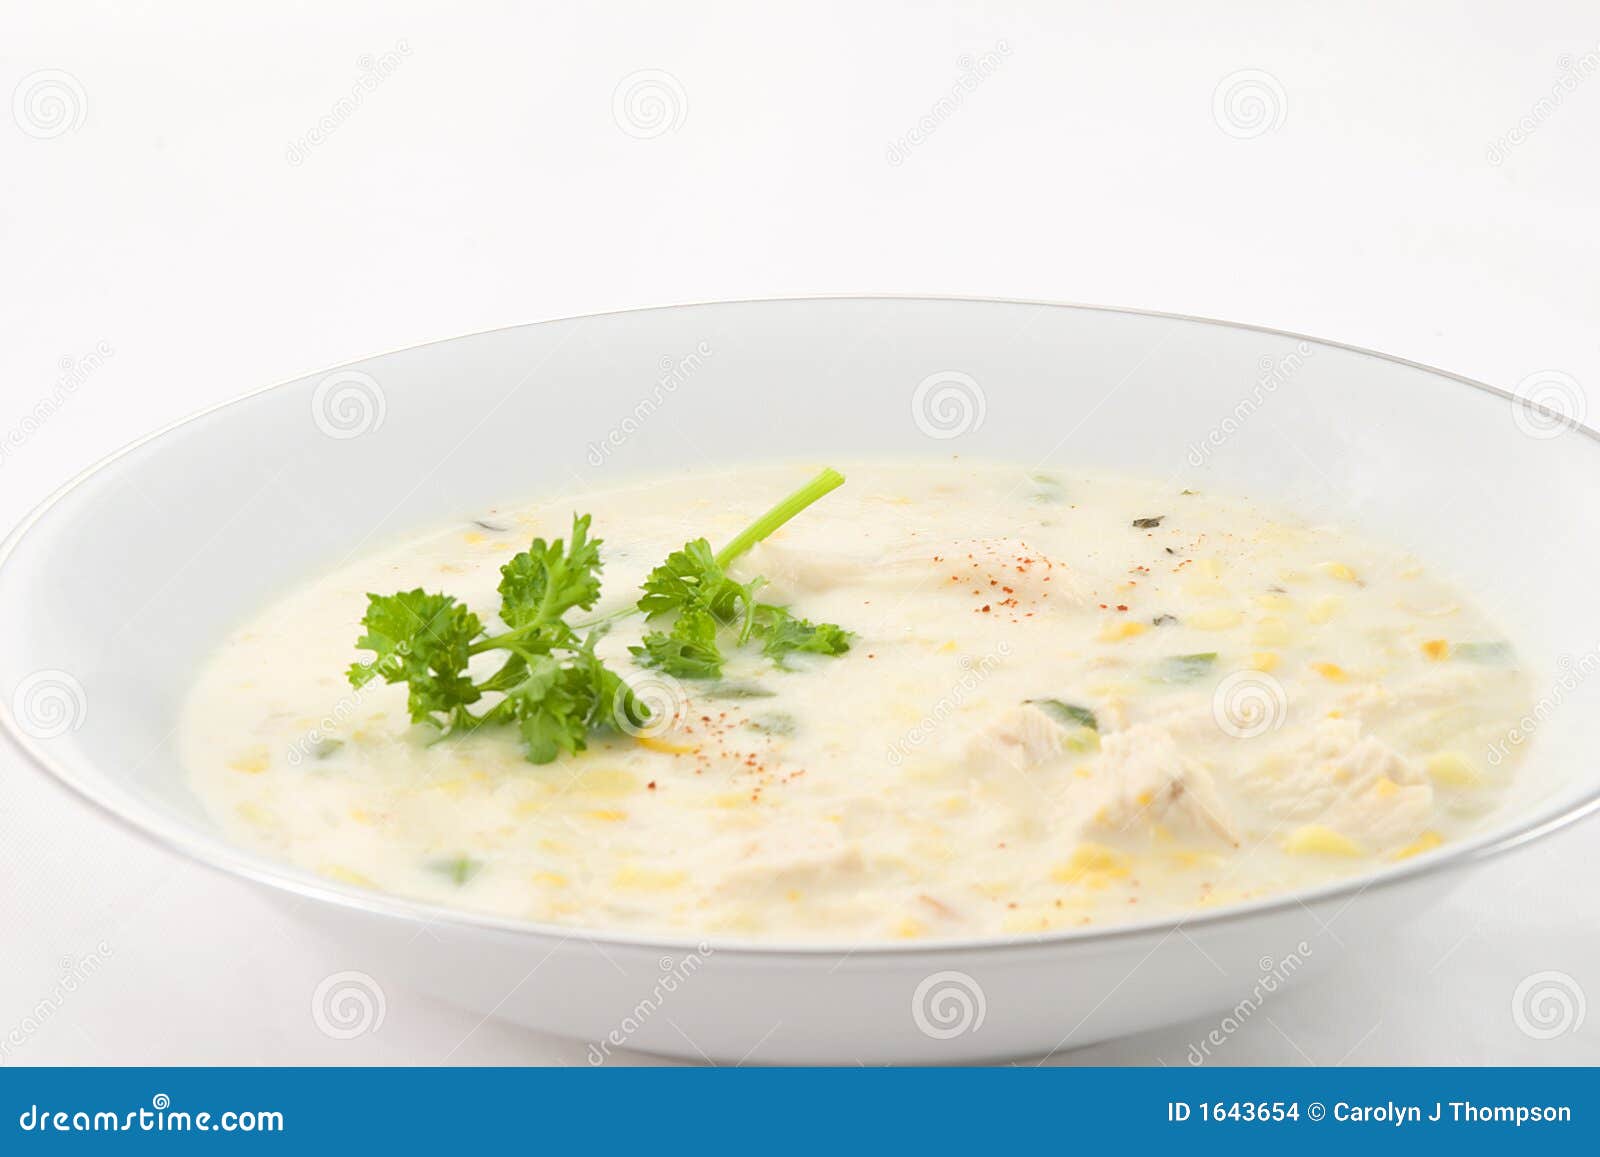 Corn Chowder with Chicken stock photo. Image of parsley - 1643654